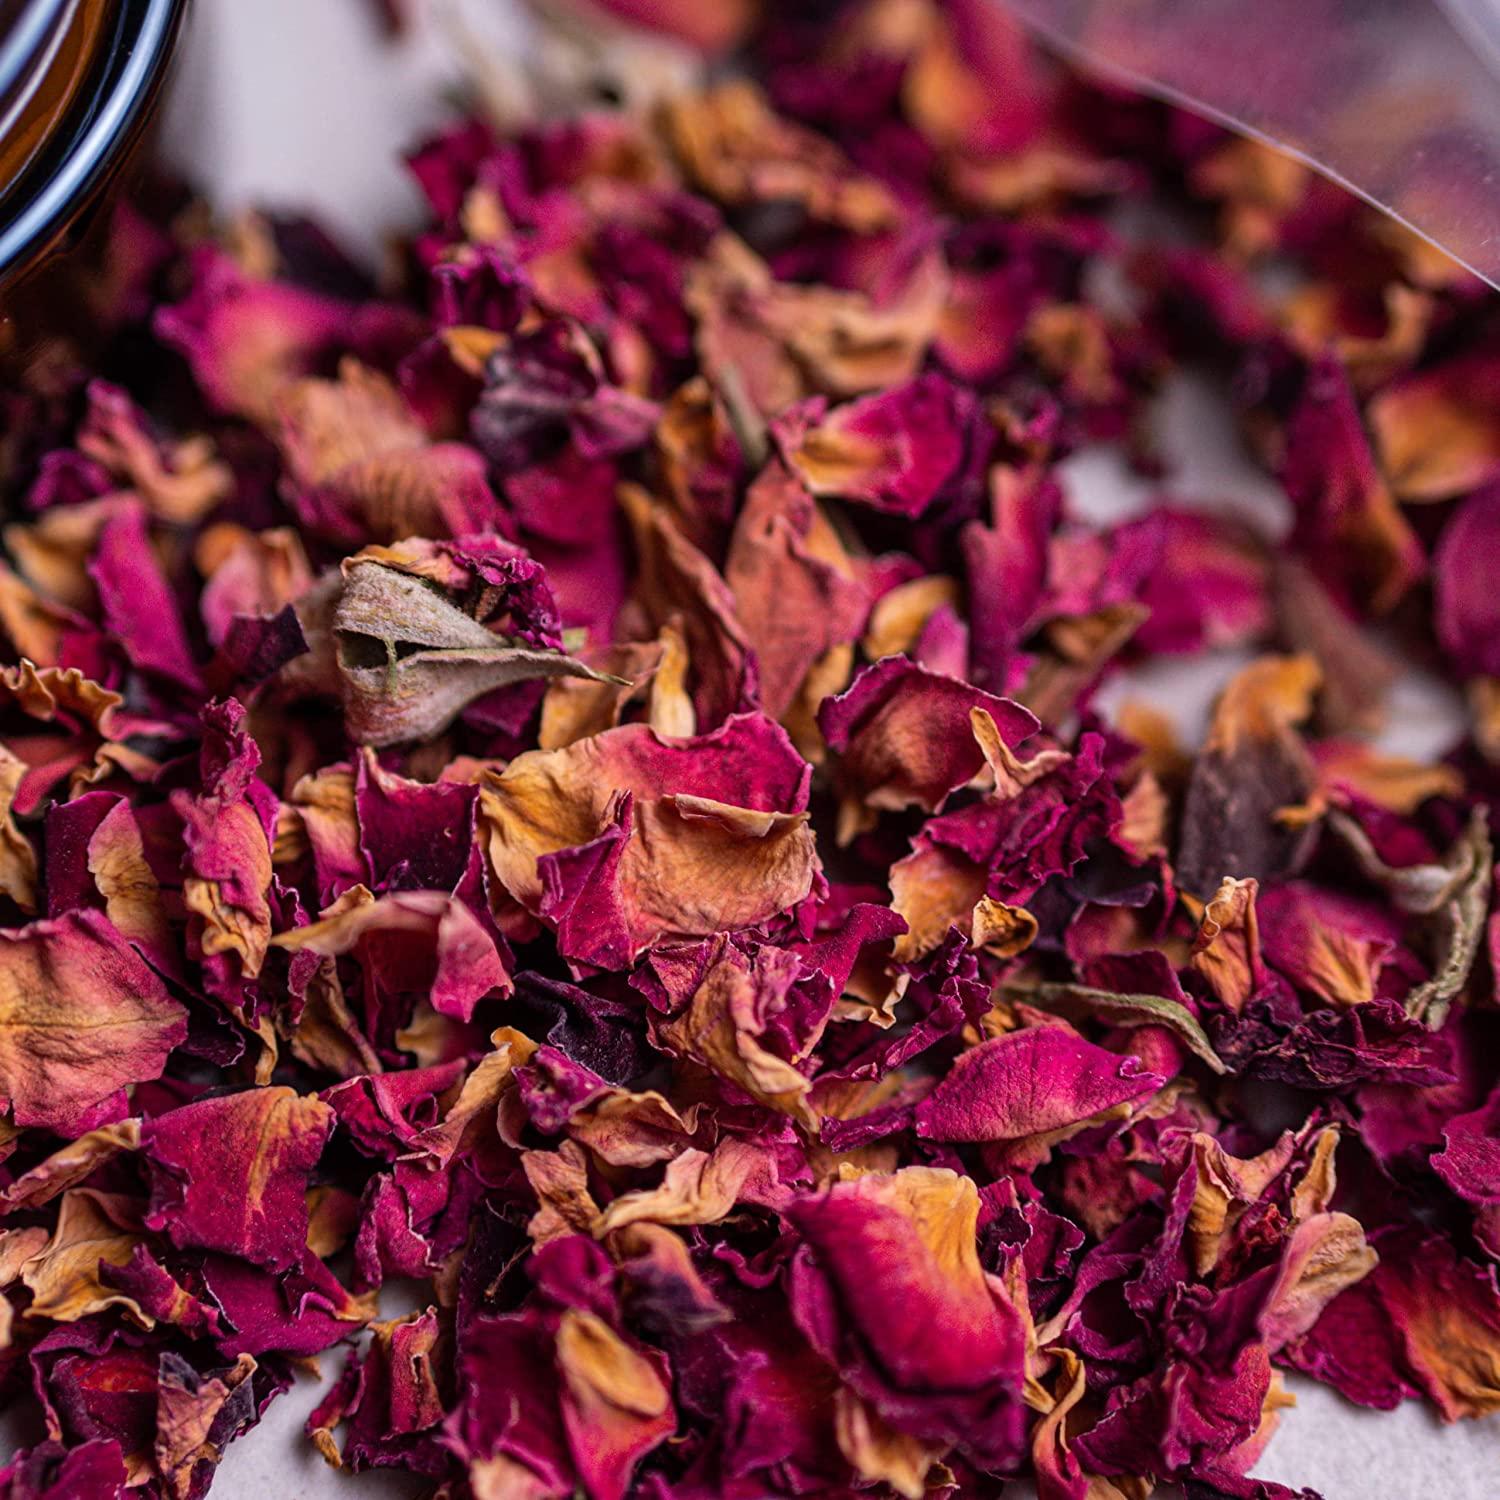 Red Rose Petals - Pure, All Natural & Edible Rose Kuwait